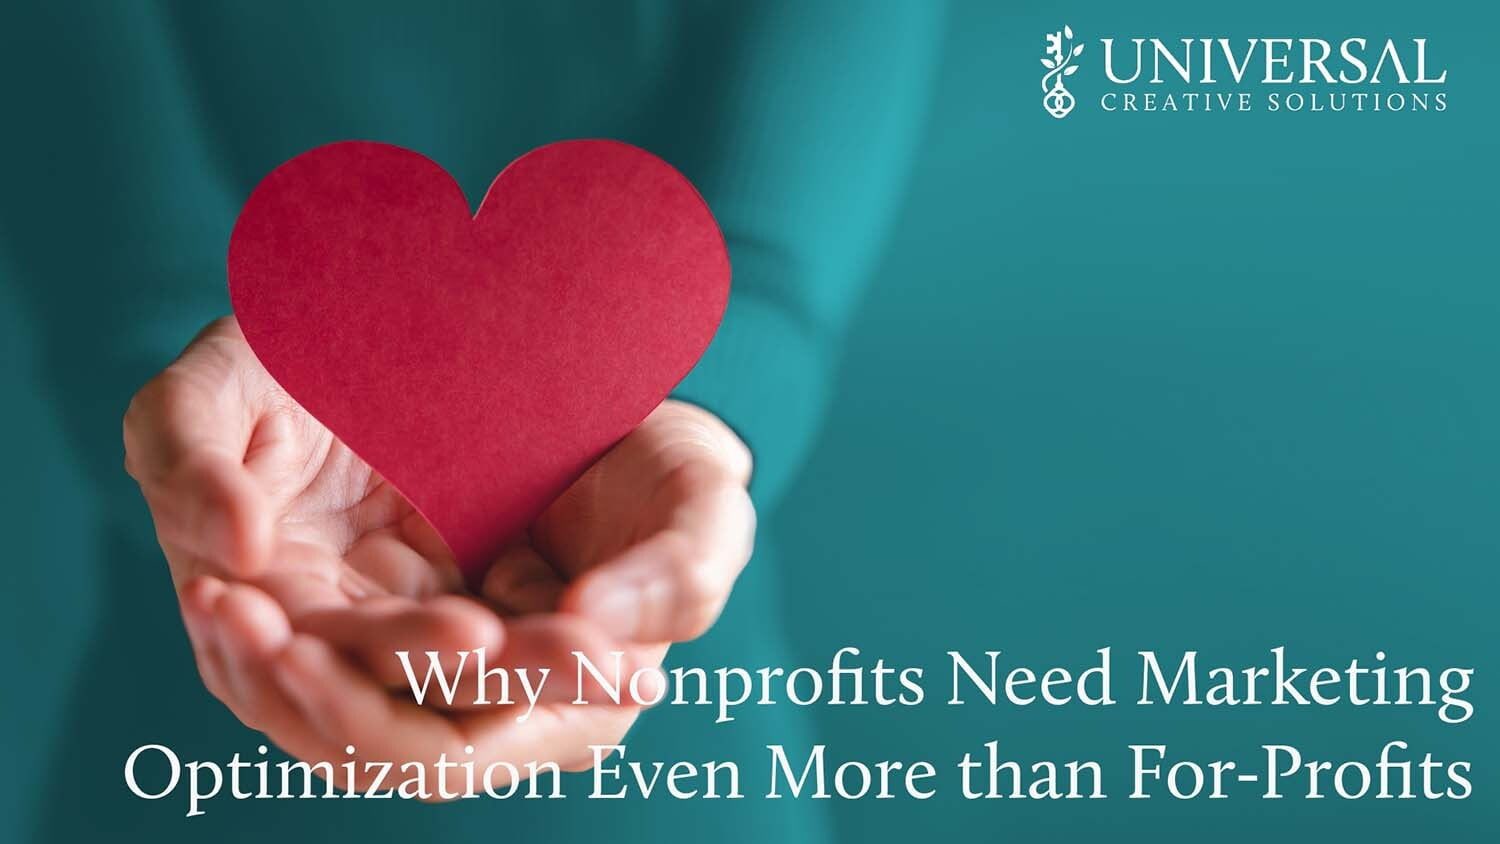 Why Nonprofits Need Marketing Optimization Even More than For-Profits